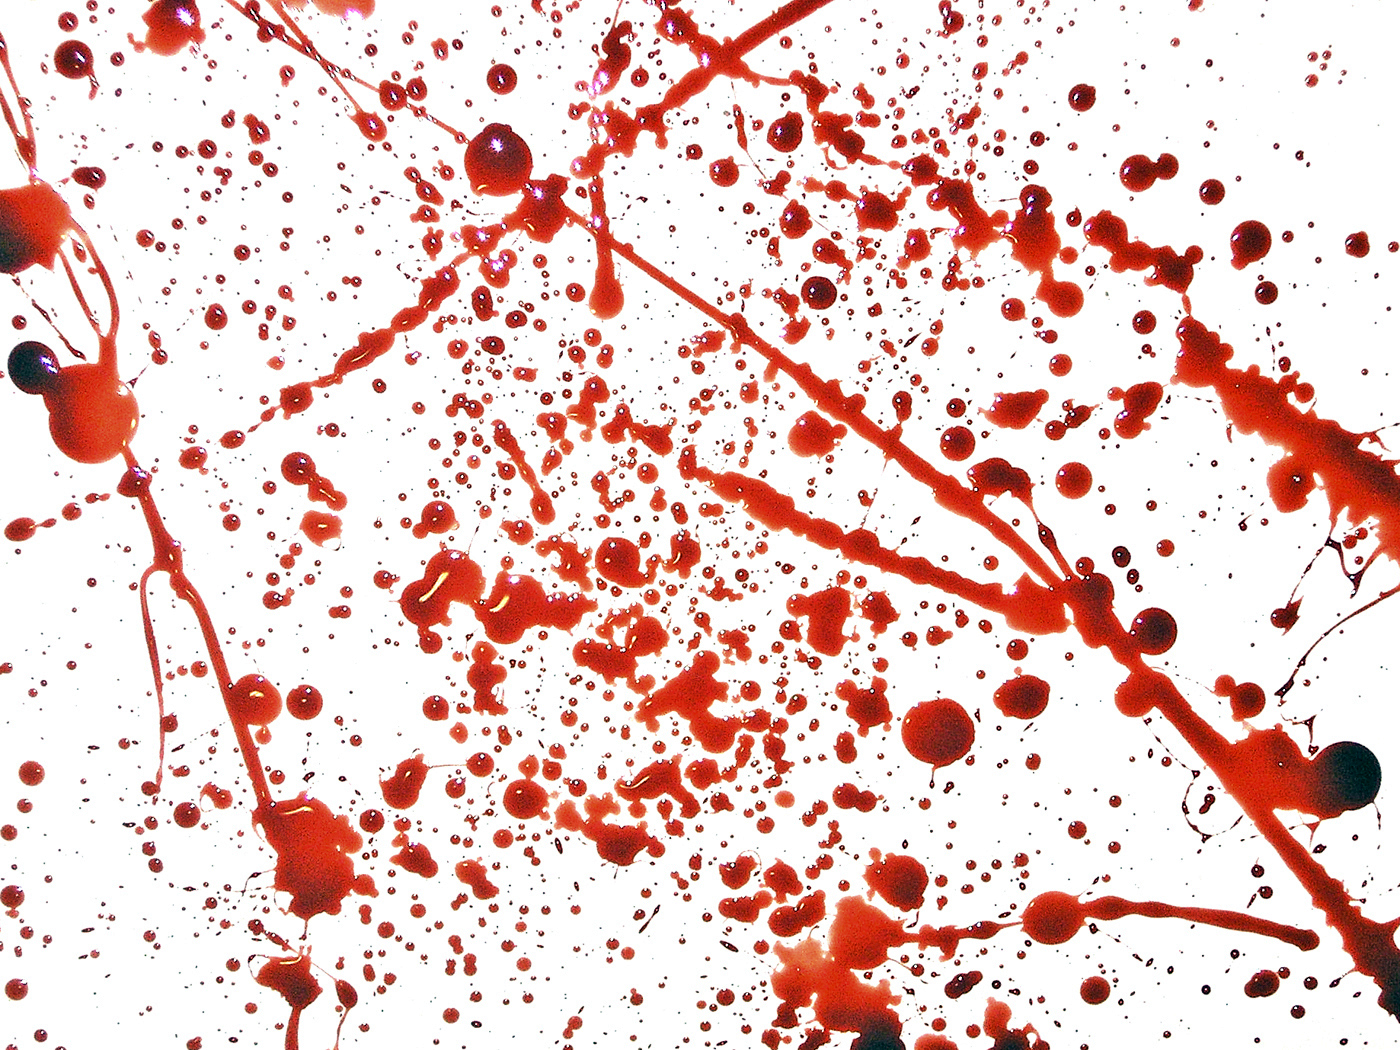 Browse 84 blood splatter black background stock photos and images available